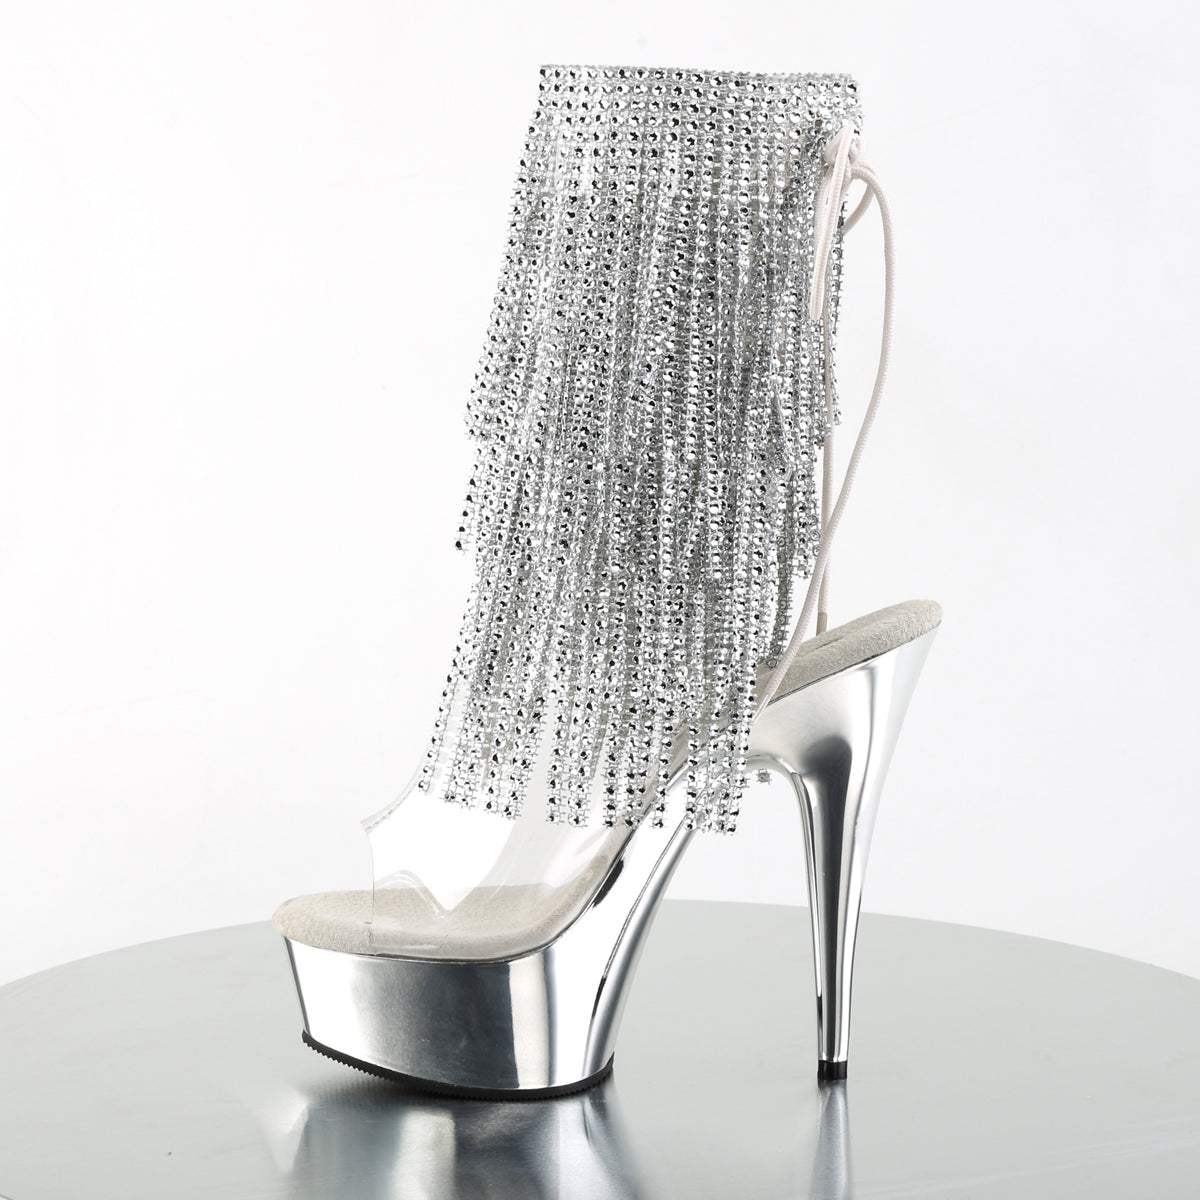 DELIGHT-1017RSF 6" Heel Clear Silver Chrome Strippers Shoes-Pleaser- Sexy Shoes Pole Dance Heels